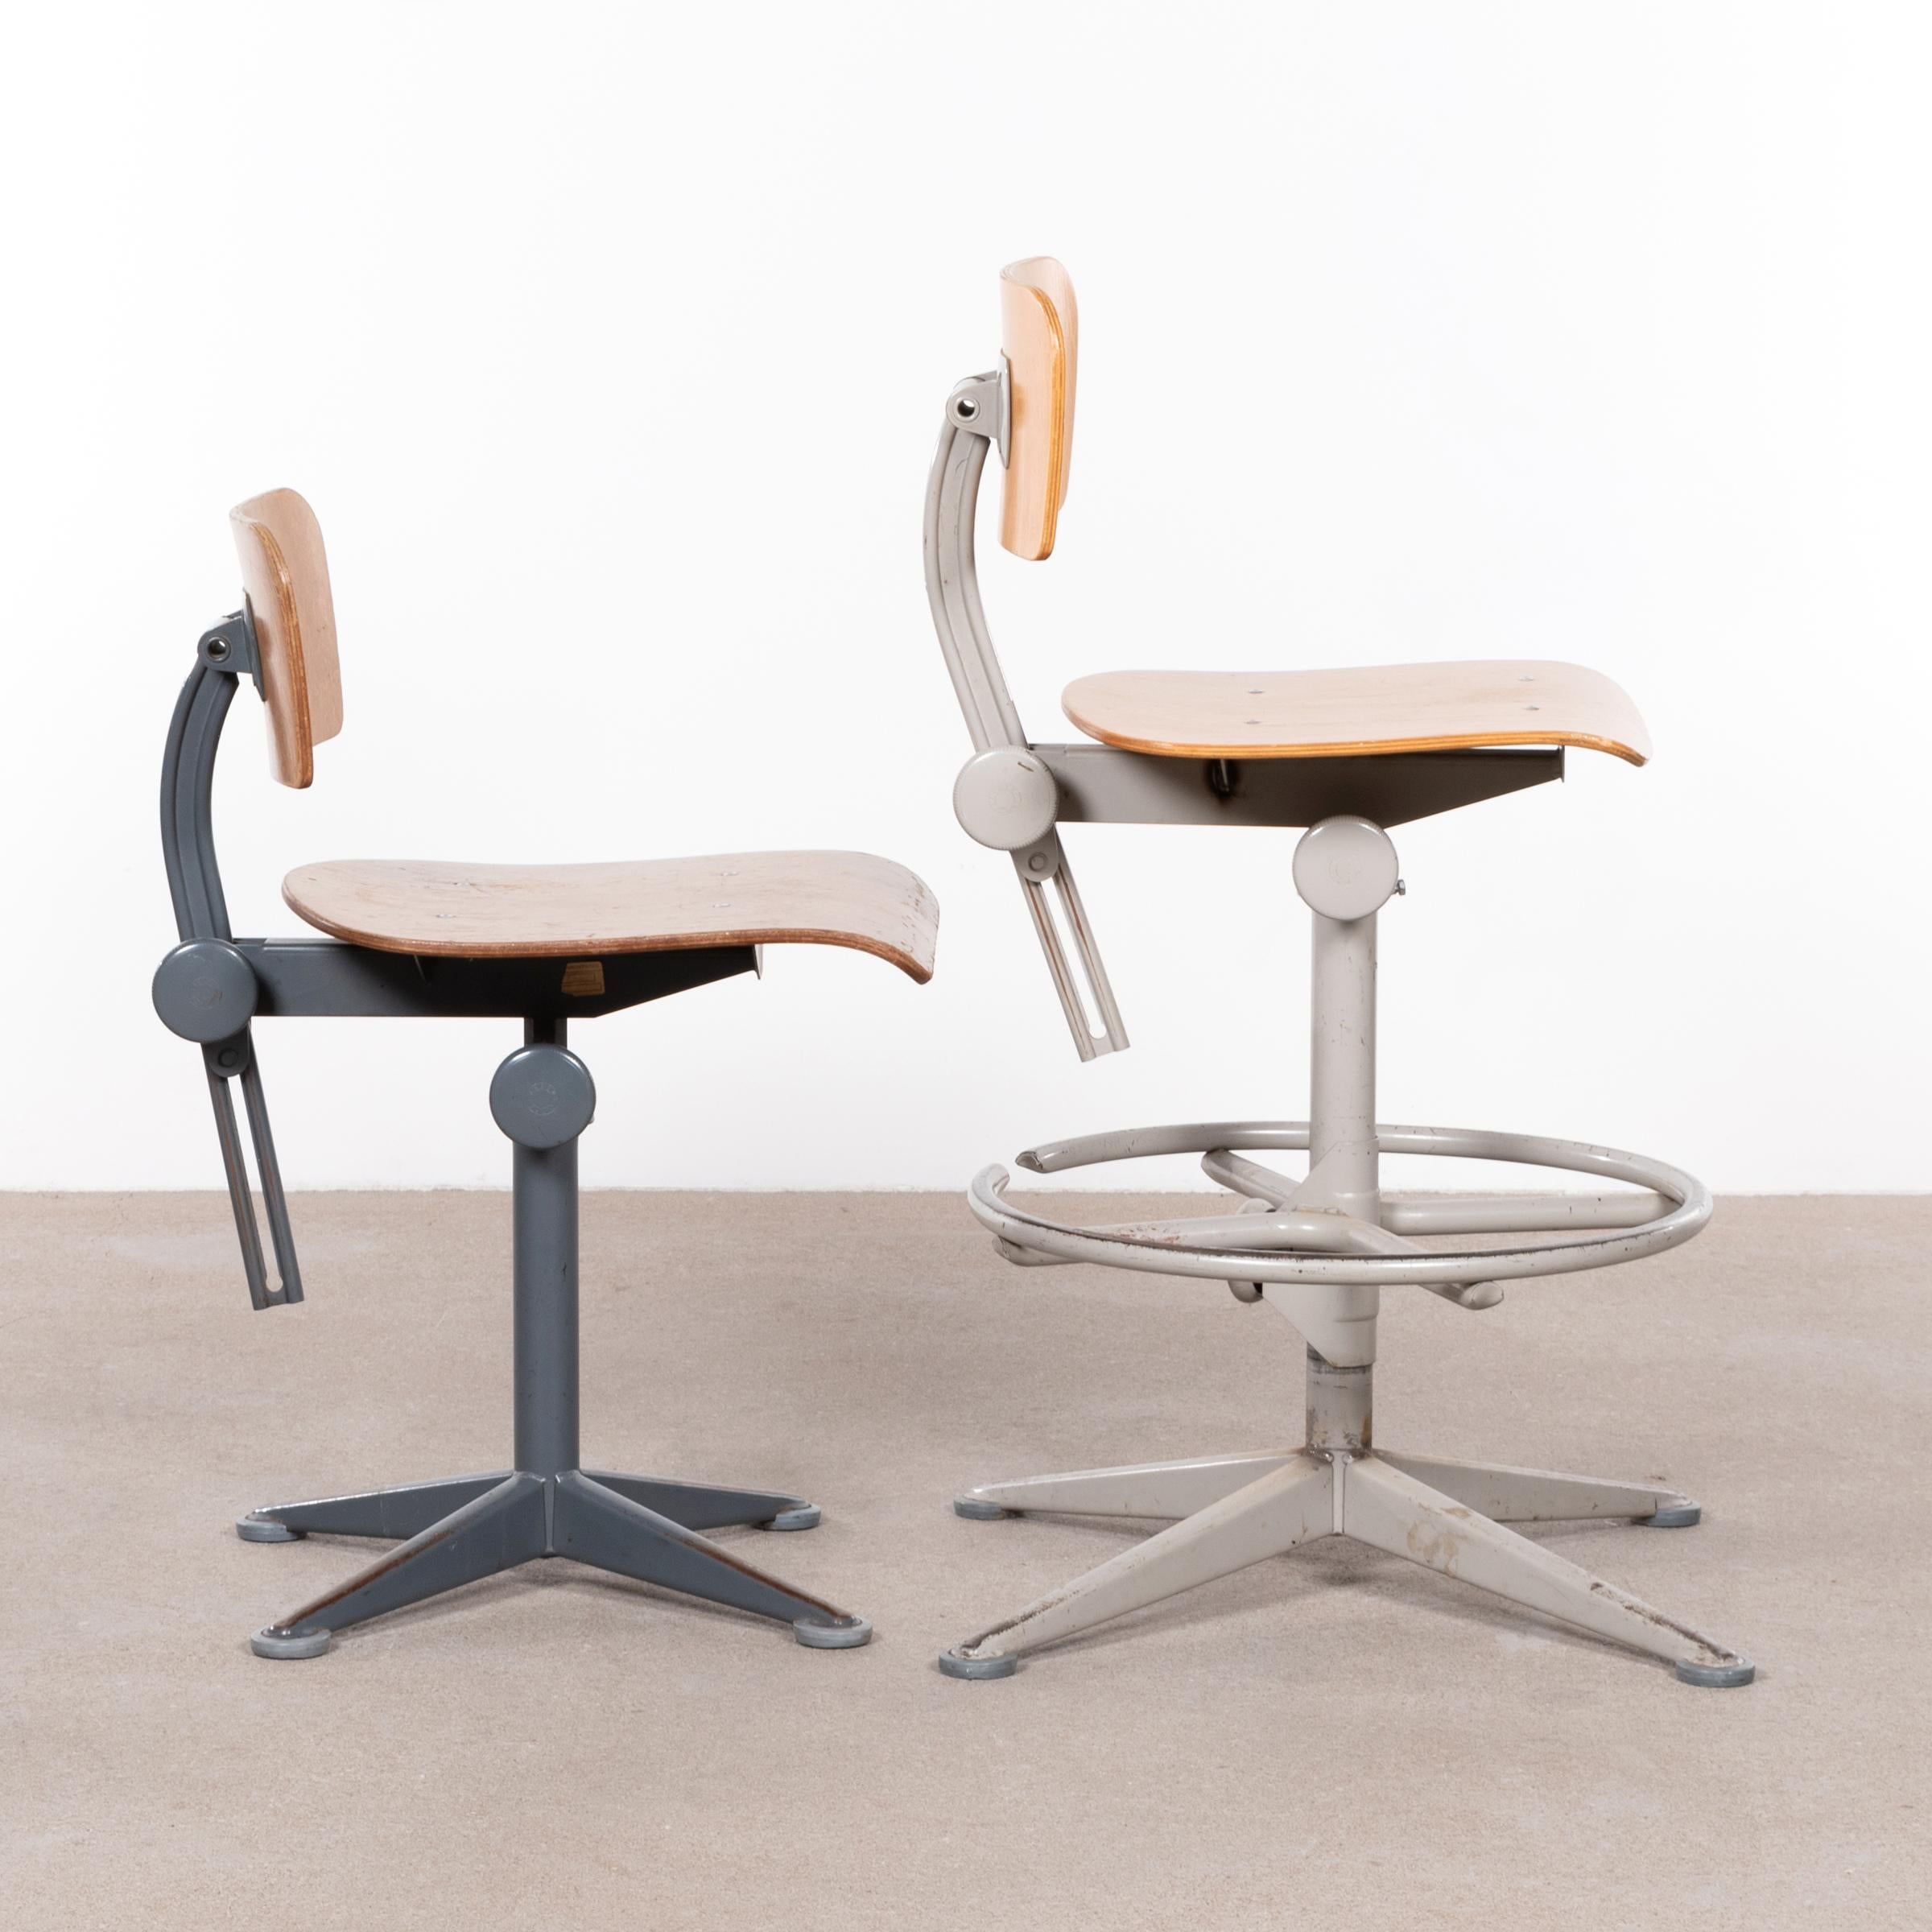 Functional and industrial drafting stools (arhitect stools) by Friso Kramer. The stools are adjustable in seating height and swivel. Good vintage condition with steel bases and plywood seats / back rest. Signed with impressed manufacturer's